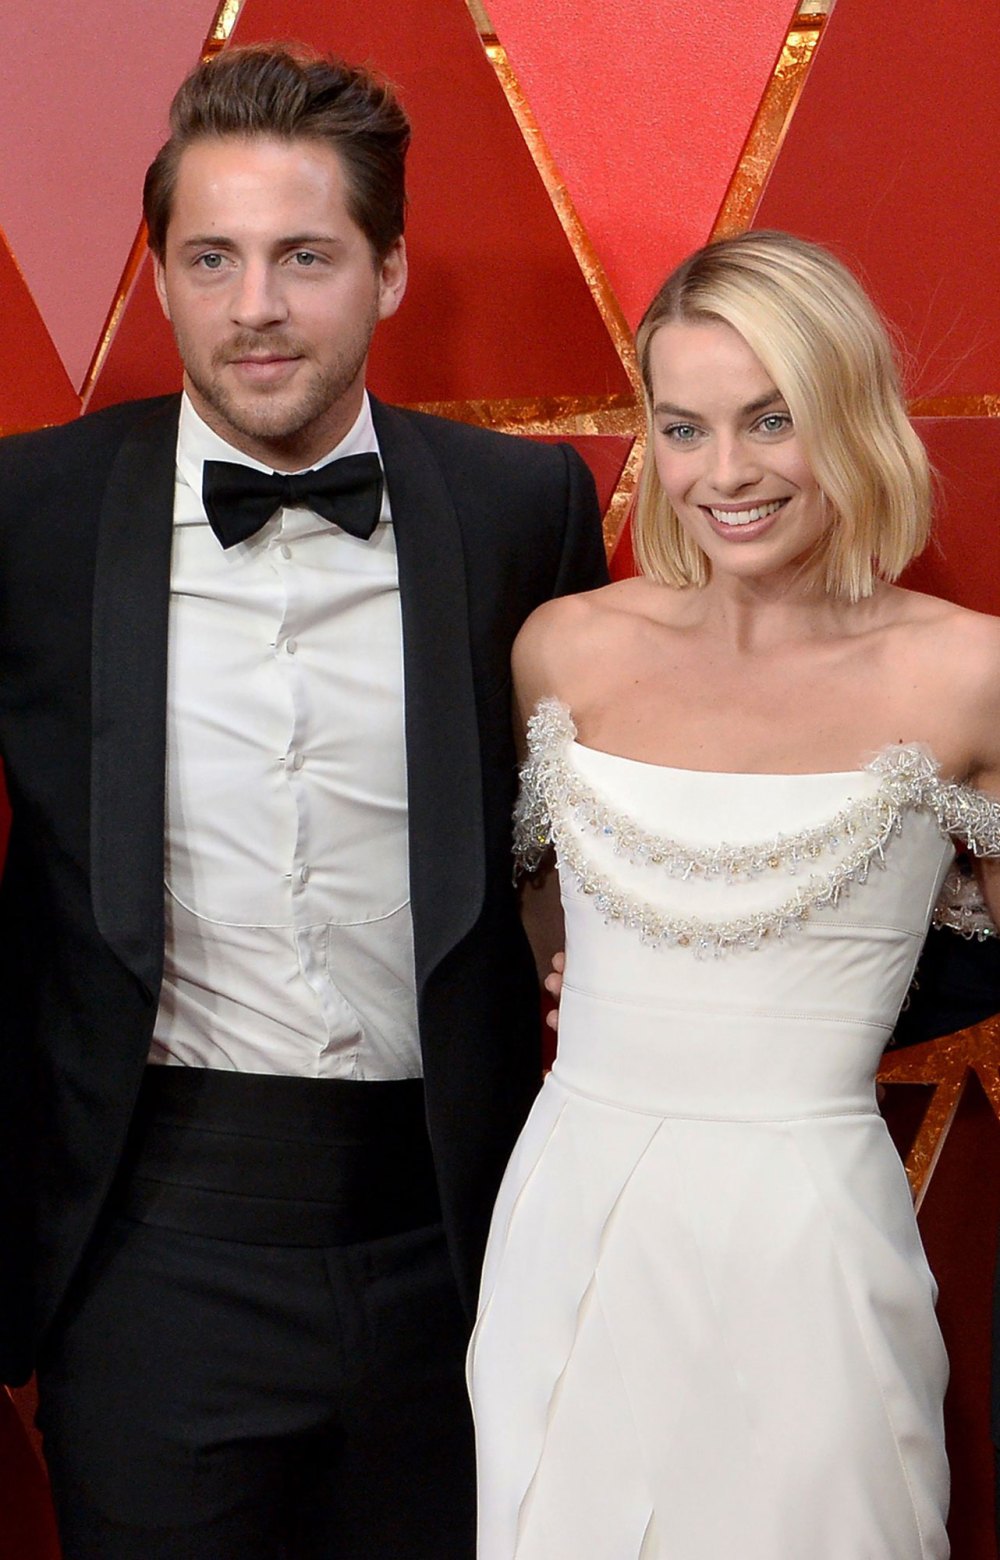 She is married so not real: Margot Robbie dating trend takes over